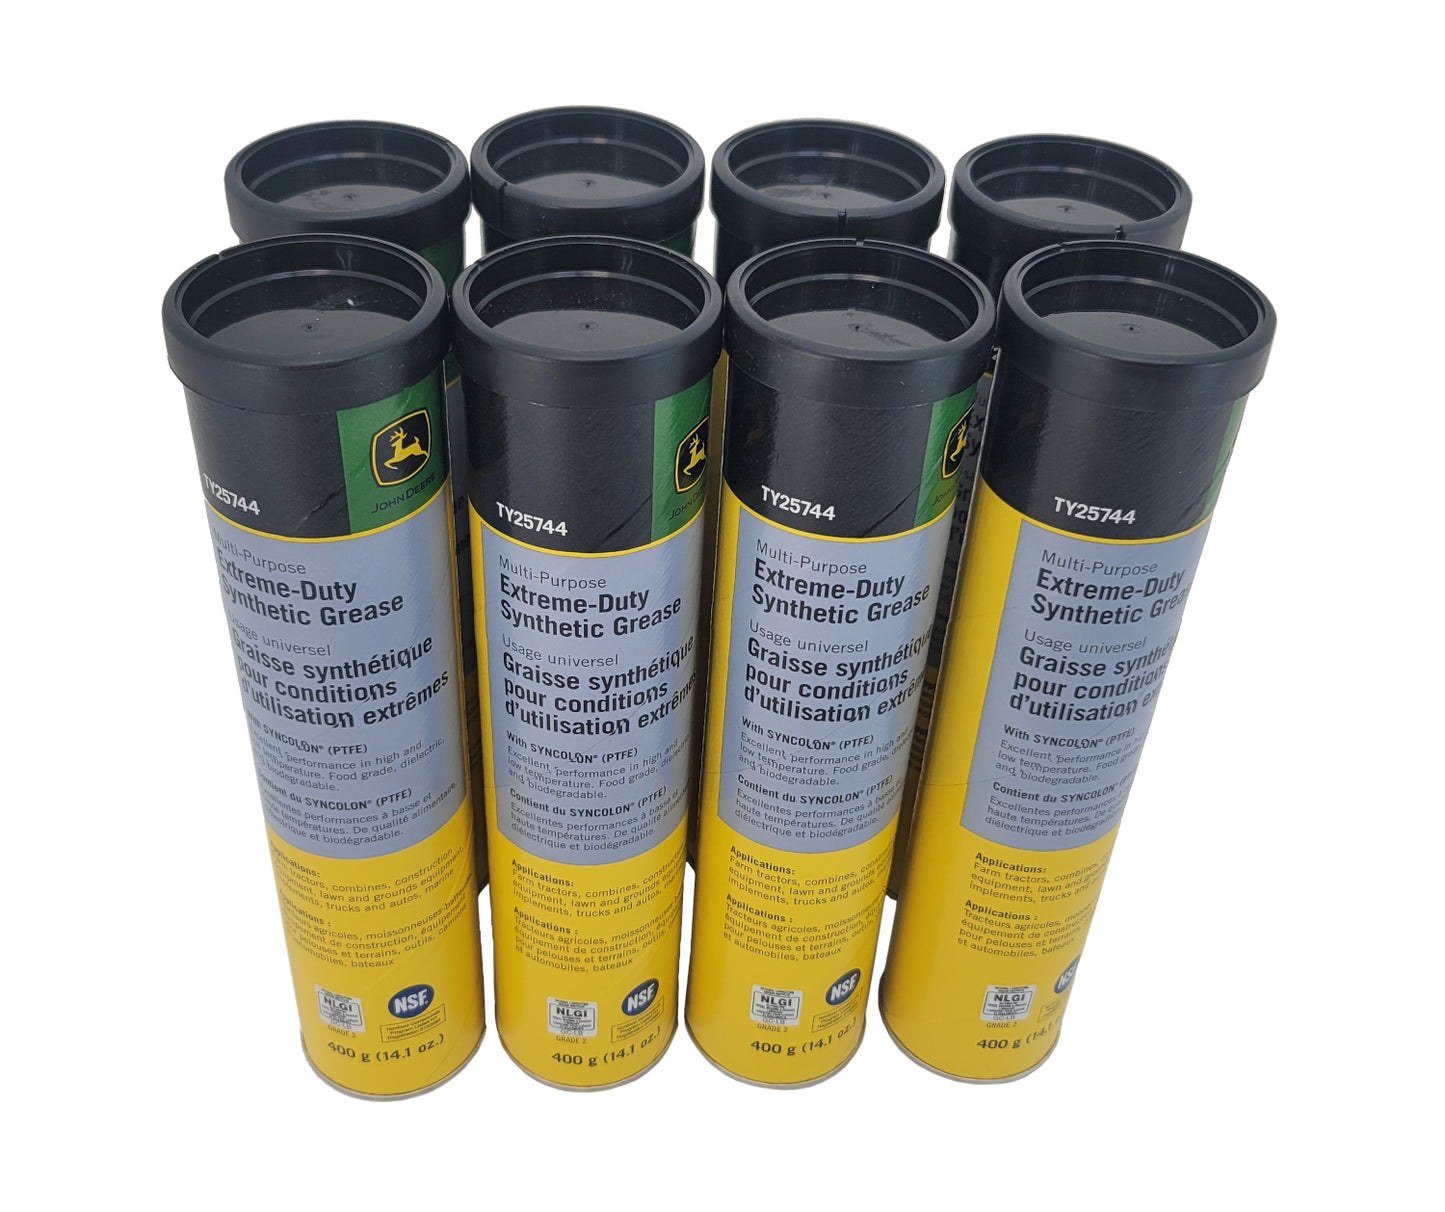 John Deere Original Equipment (8 PACK) Extreme-Duty Synthetic Grease - TY25744